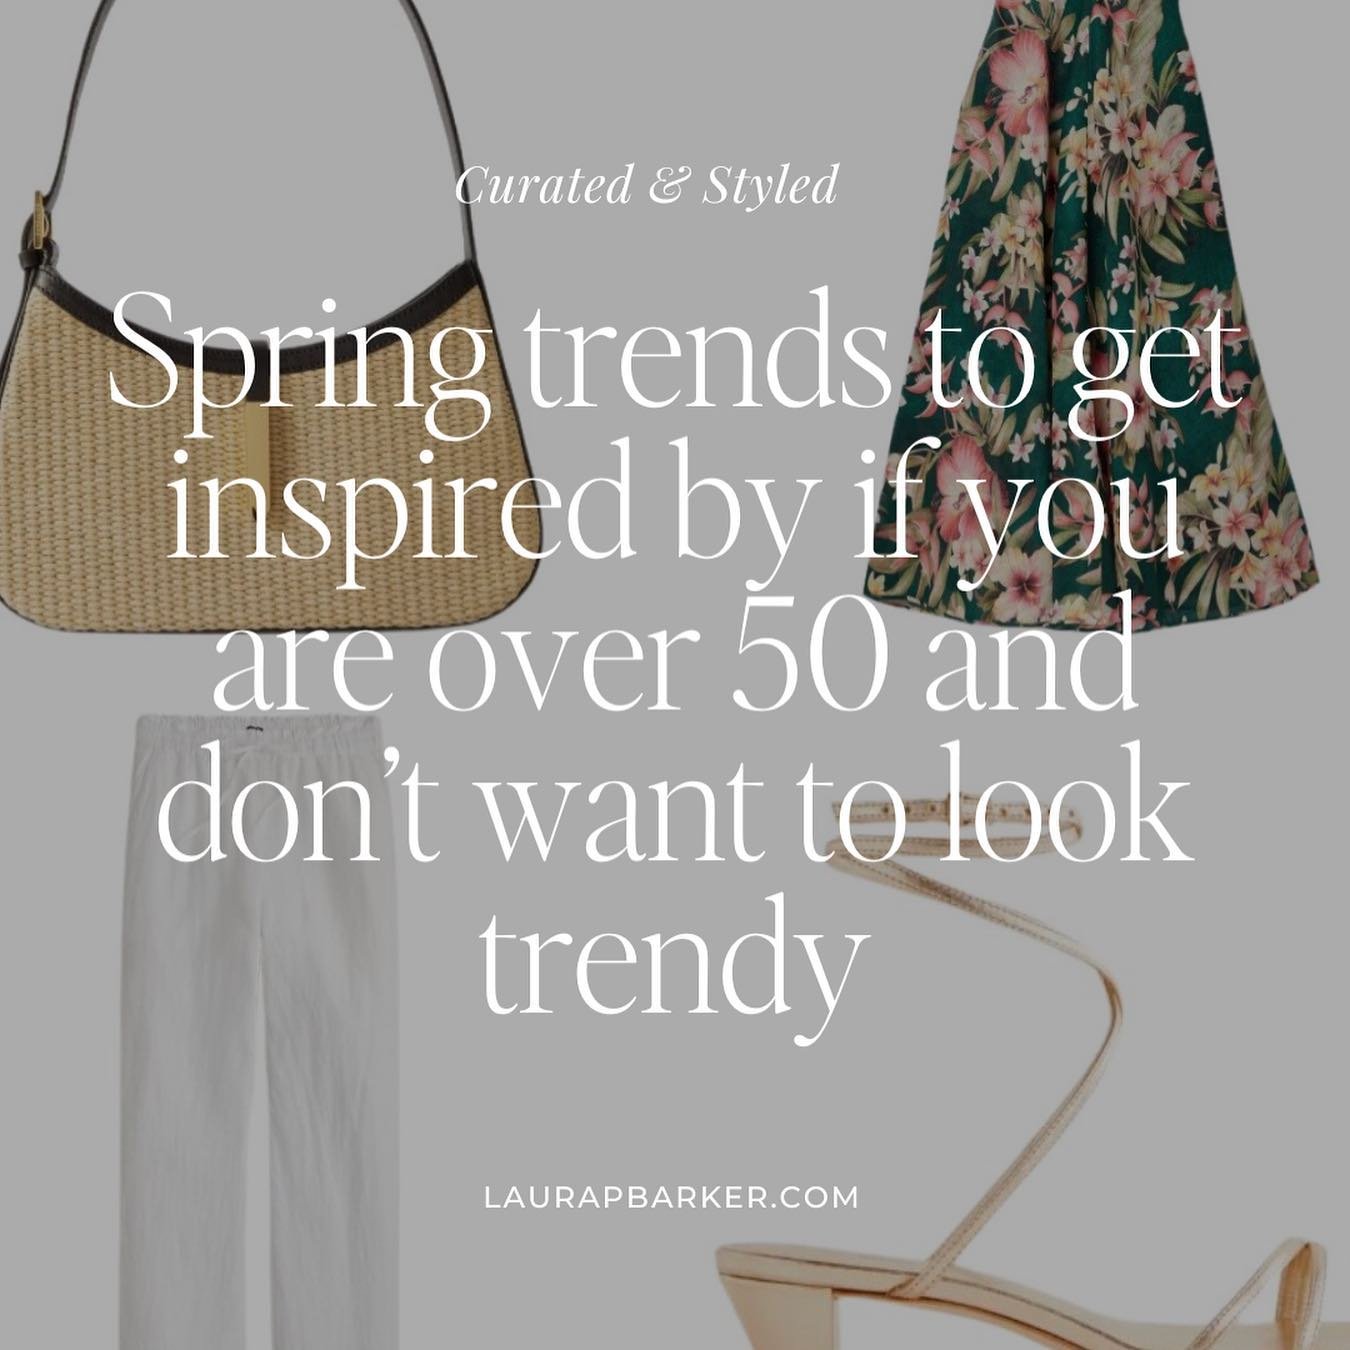 Your&rsquo;e over 50 and you want to modern, not trendy. 

Can you relate? 💫

In the spirit of evolution, I&rsquo;m sharing something a little different this month on the blog. 
I&rsquo;ve curated some Spring trends for you that are timeless, not tr